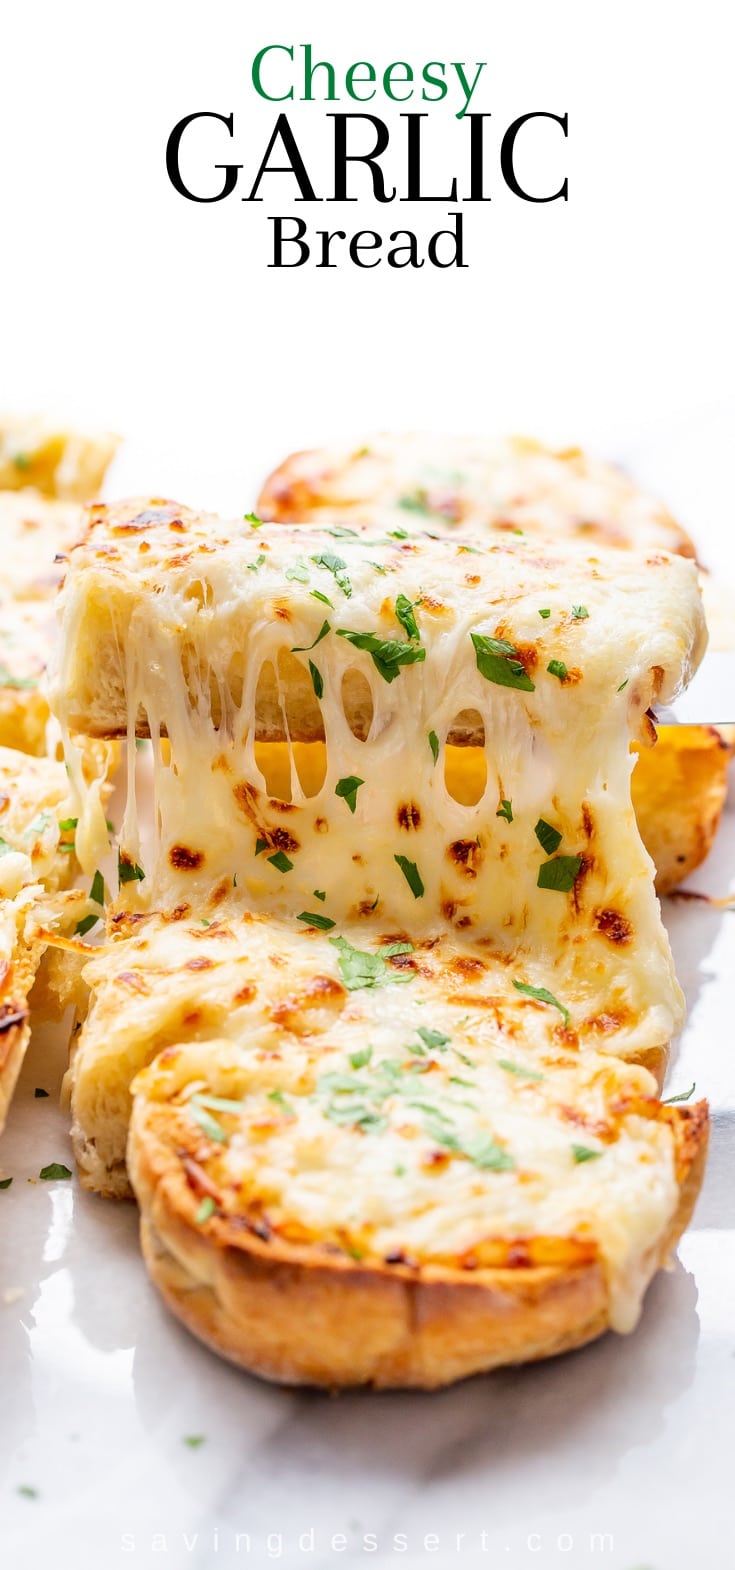 Sliced garlic bread topped with melted cheese and parsley